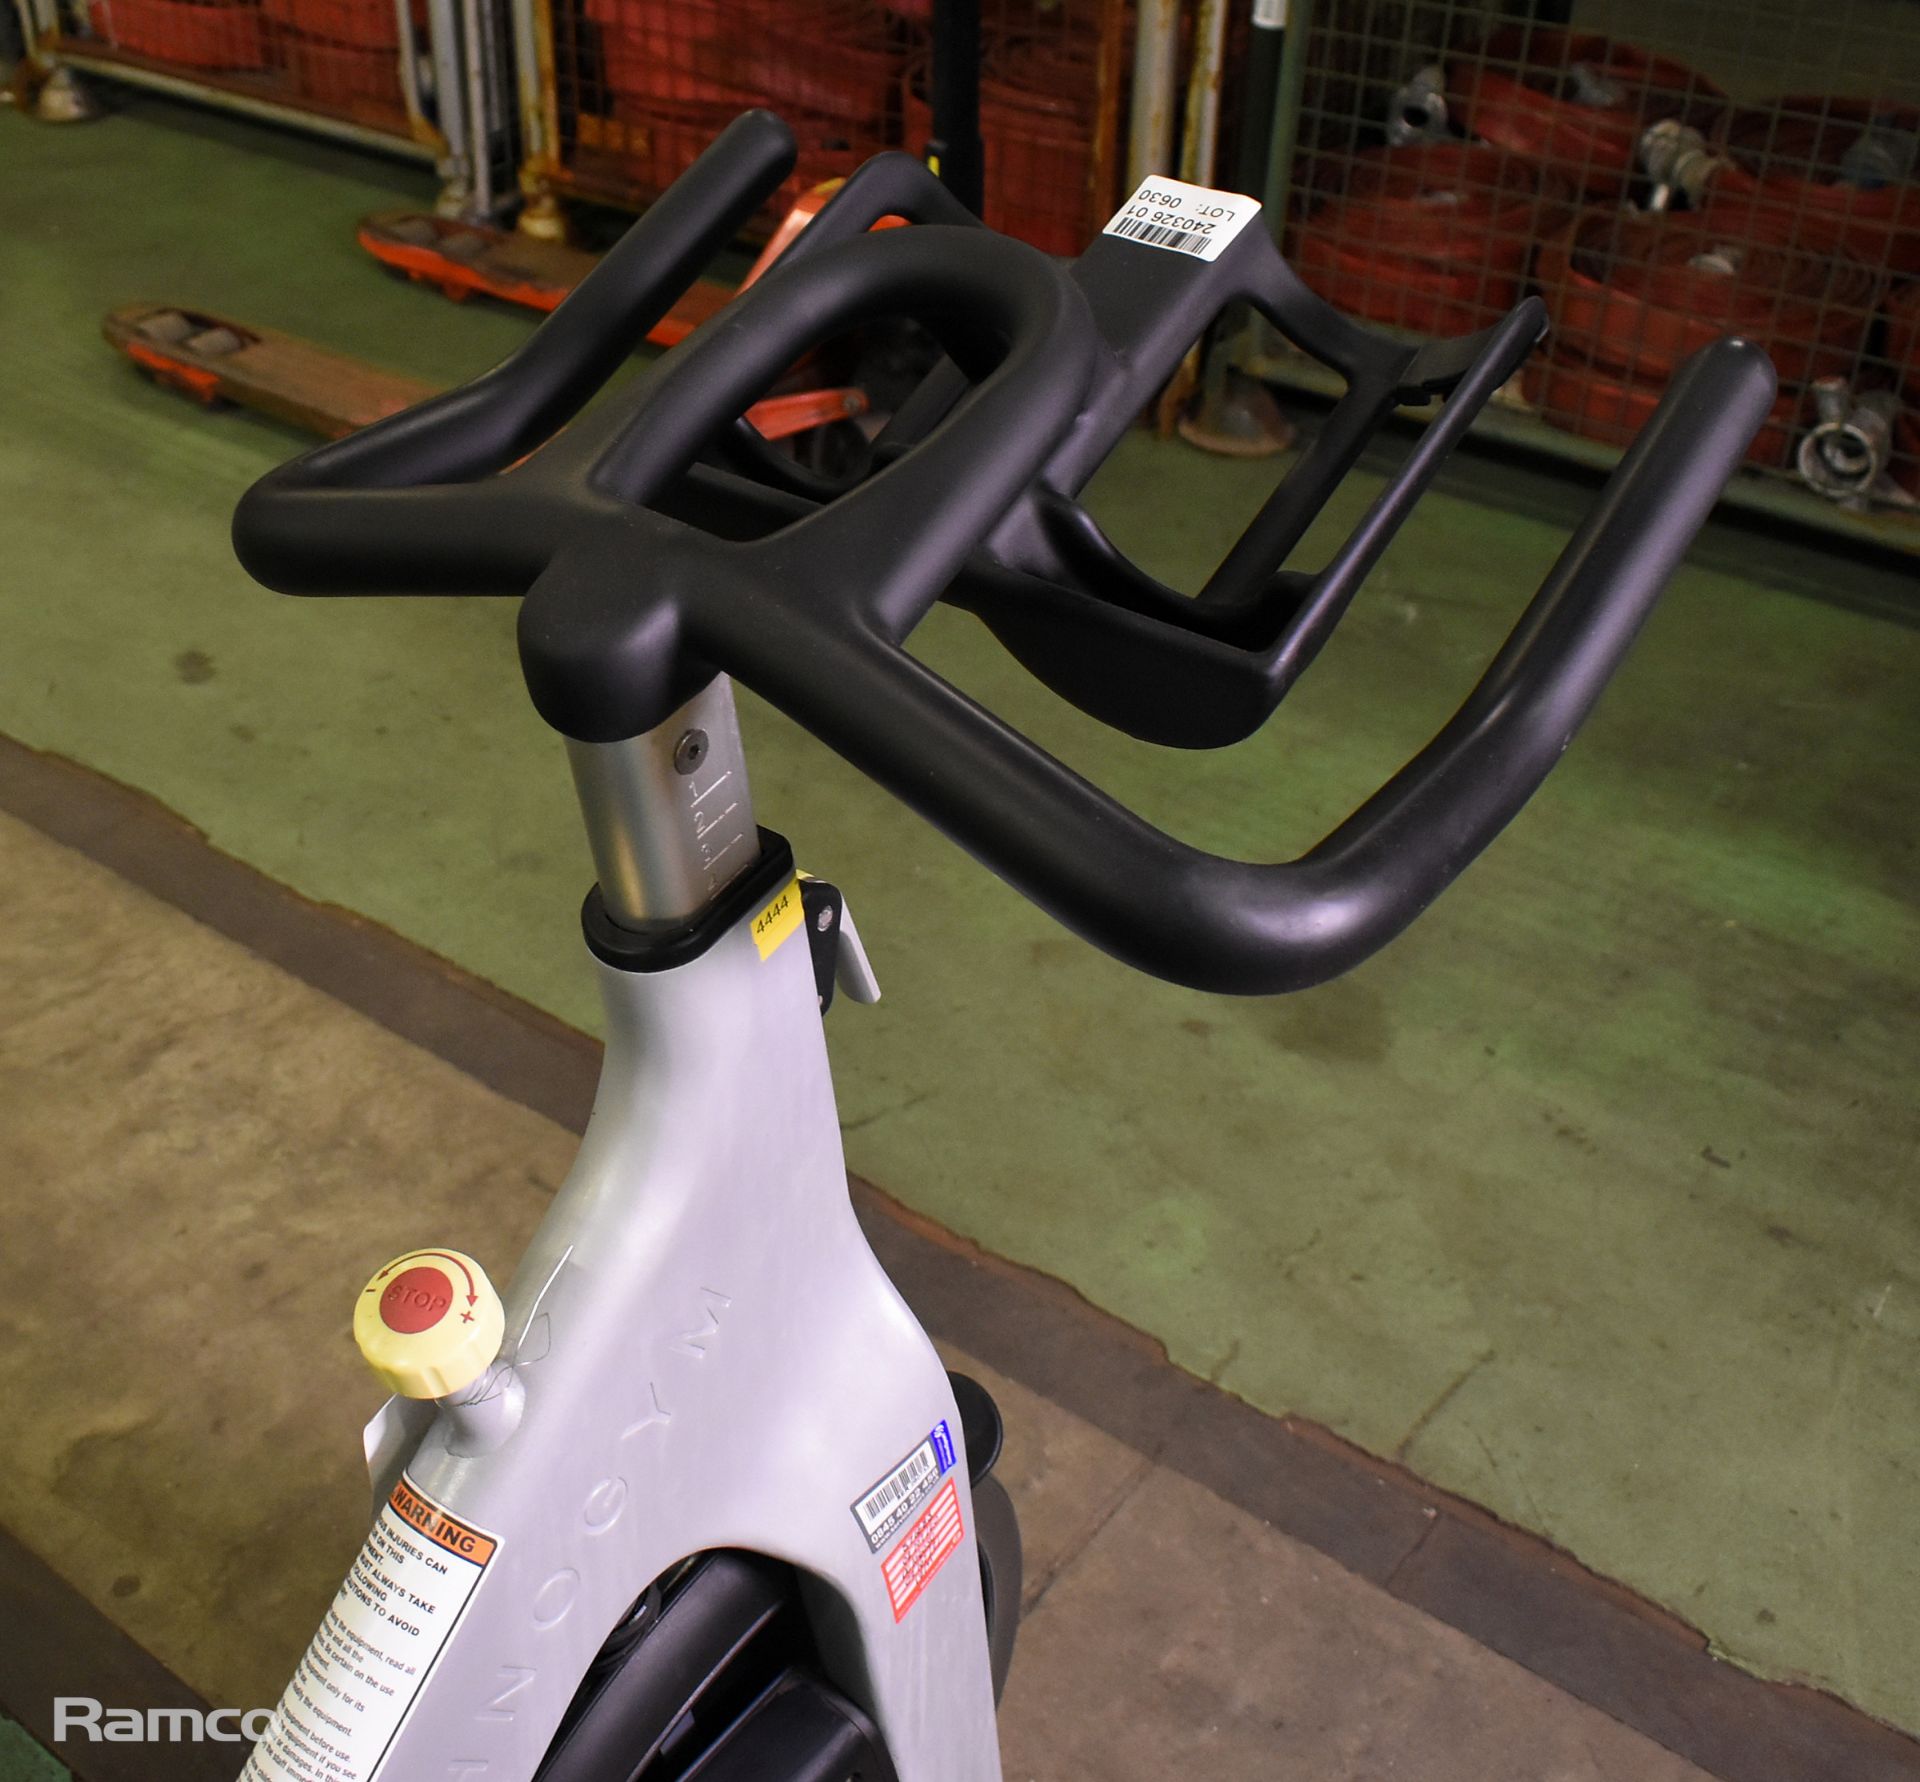 3x TechnoGym Group cycle spinning bikes - Image 13 of 23